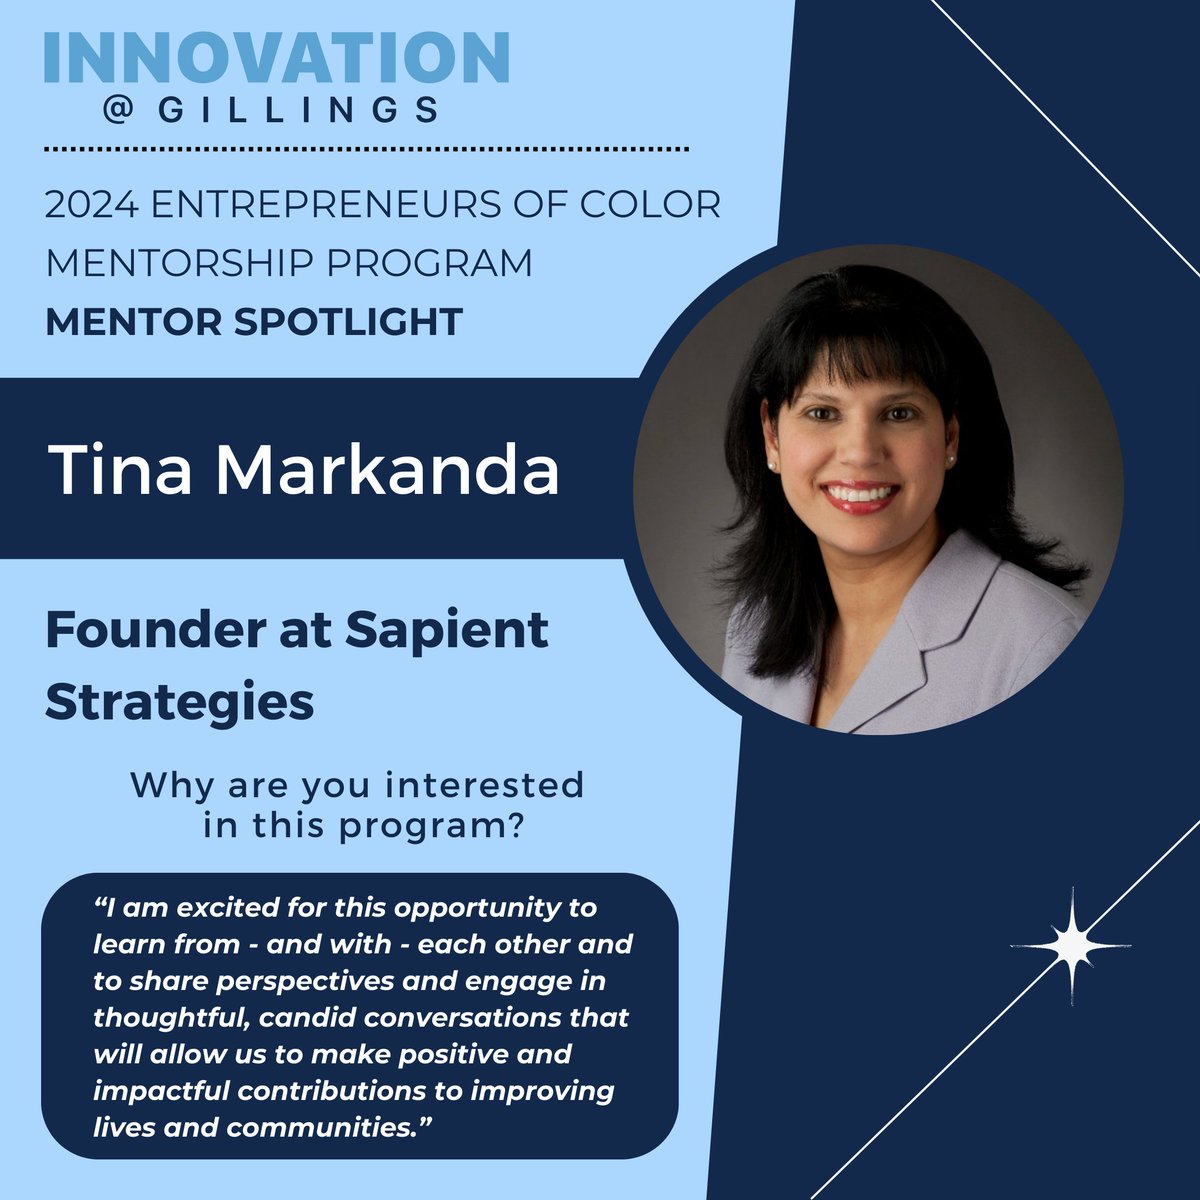 Introducing Lauryn Taylor and Tina Markanda of the 2024 Entrepreneurs of Color Mentorship Program! Lauryn is an undergraduate student interested in healthcare entrepreneurship, and Tina is the Founder of Sapient Strategies! 🌟🤝